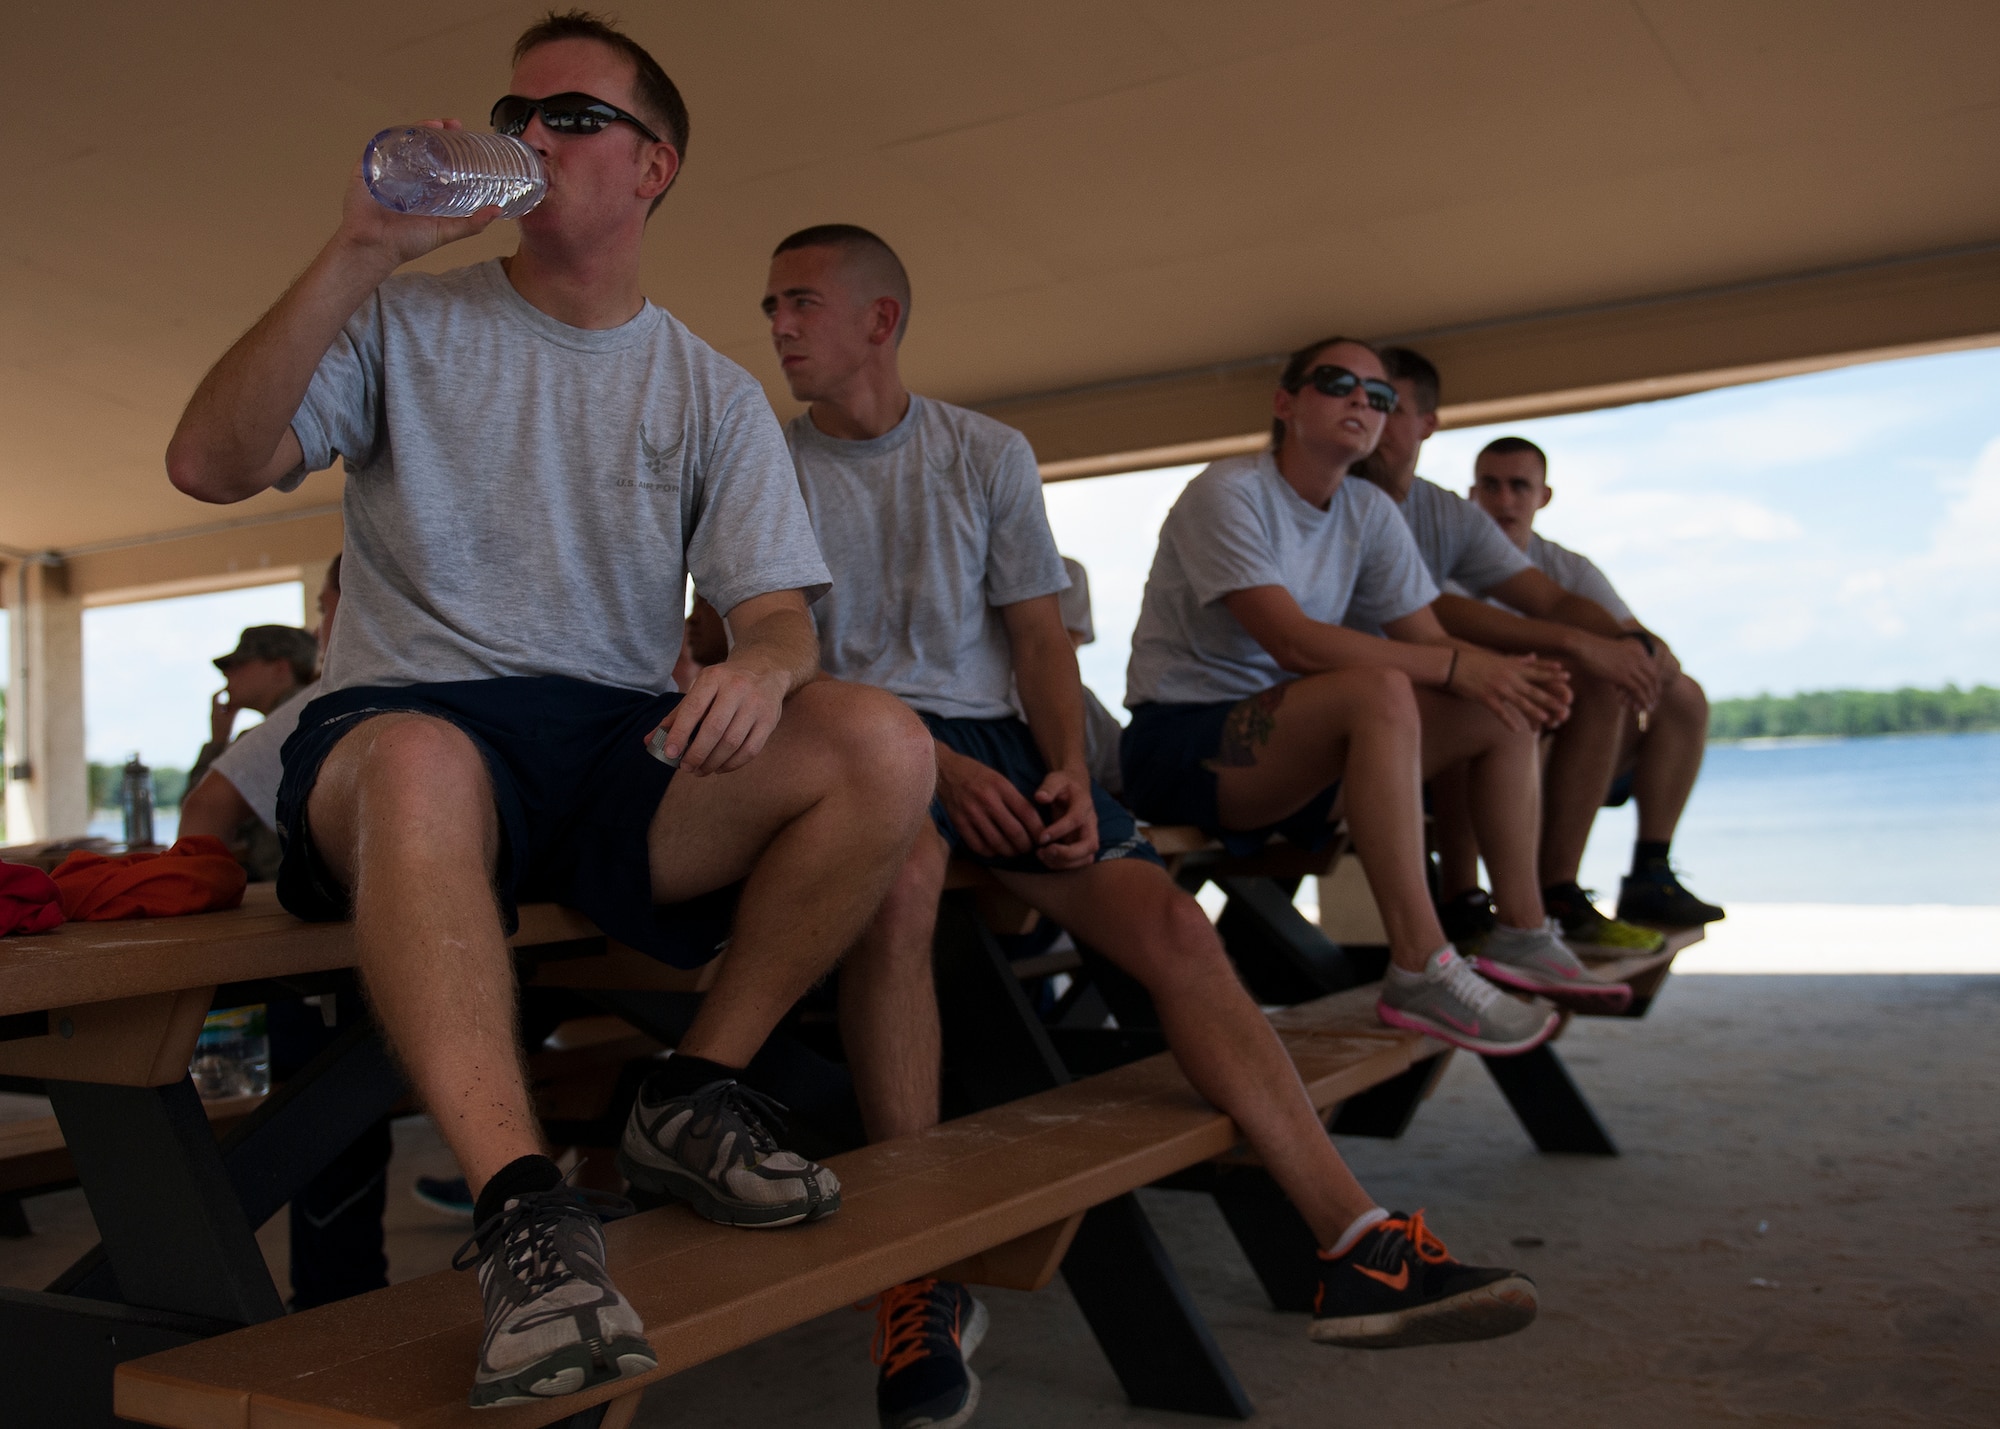 Airmen take a break after completing their mission during a joint warfare exercise at Eglin’s Post’l Point Aug. 12.  The exercise is designed to develop joint warfighter knowledge while challenging the Airmen physically and applying teamwork as a flight.  It is part of the curriculum of Eglin’s Airman Leadership School.  (U.S. Air Force photo/ Tech. Sgt. Jasmin Taylor)